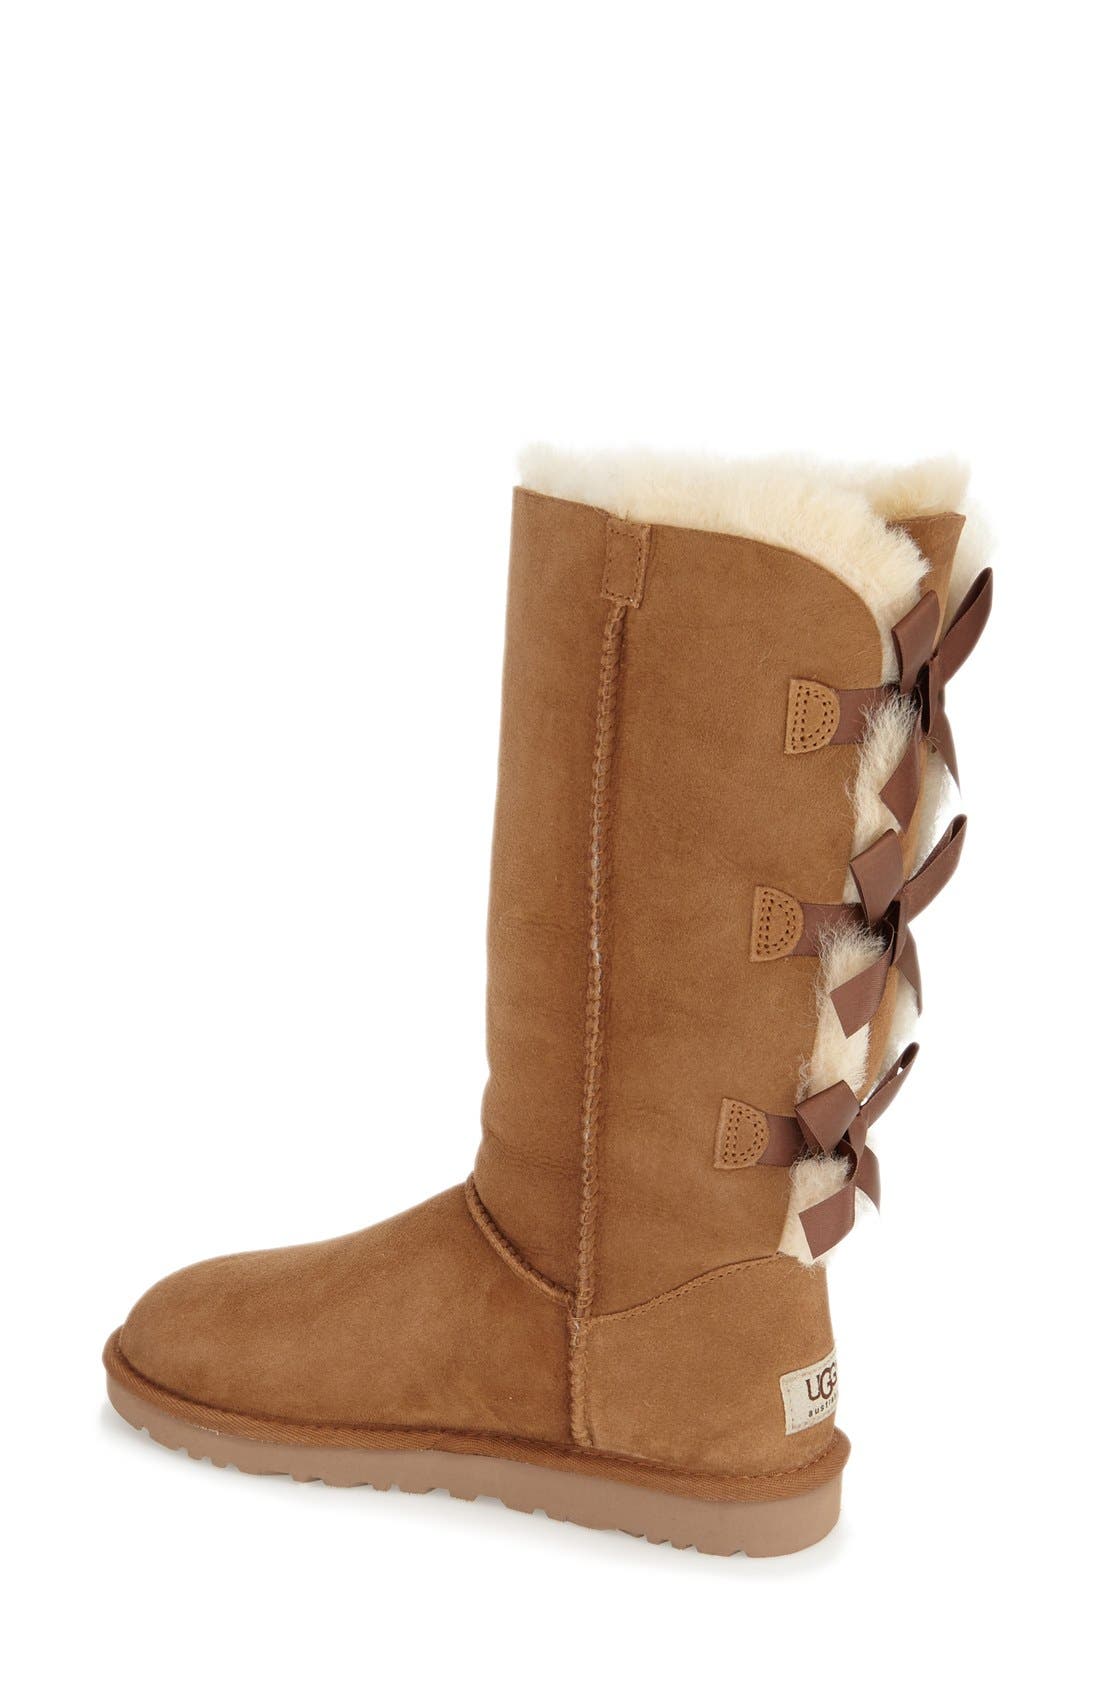 bailey bow uggs nordstrom